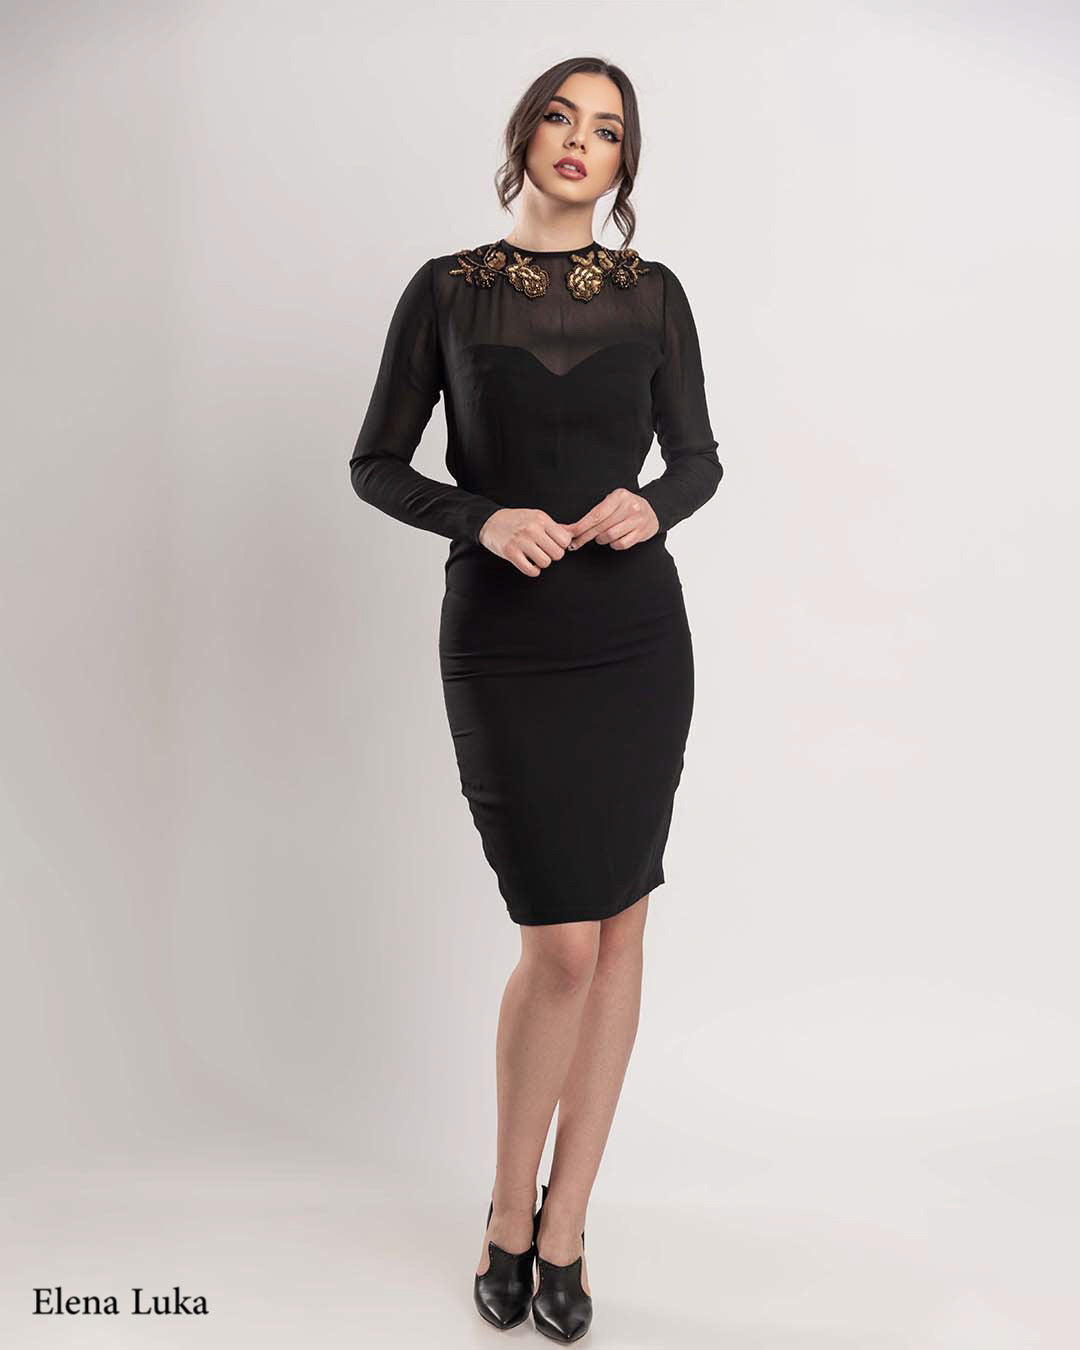 Black cocktail dress with gold lace